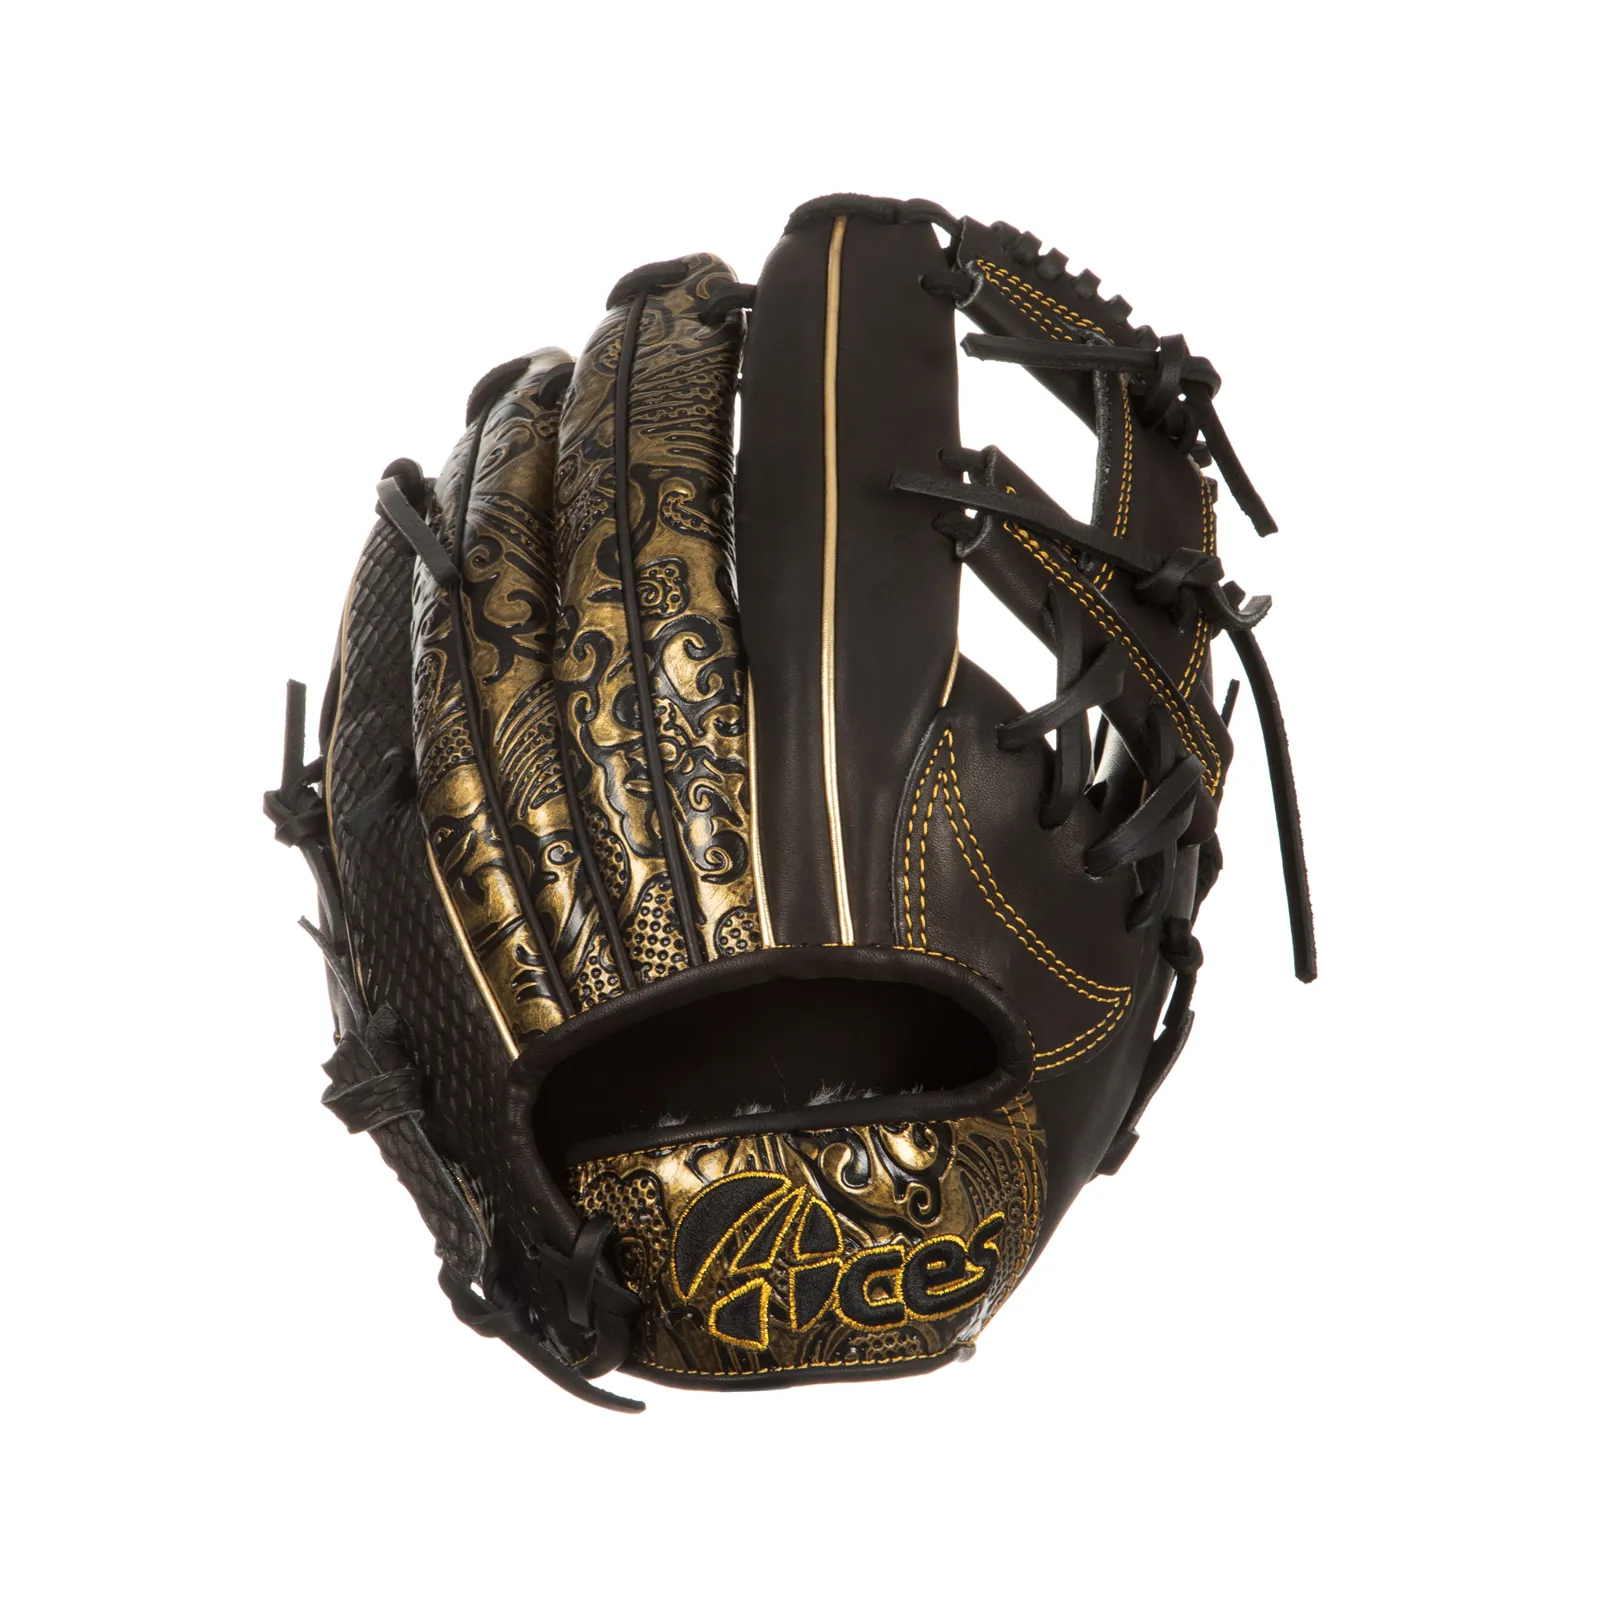 Professional Manufacturer Wholesale High Quality Baseball Glove For Outdoor Sports